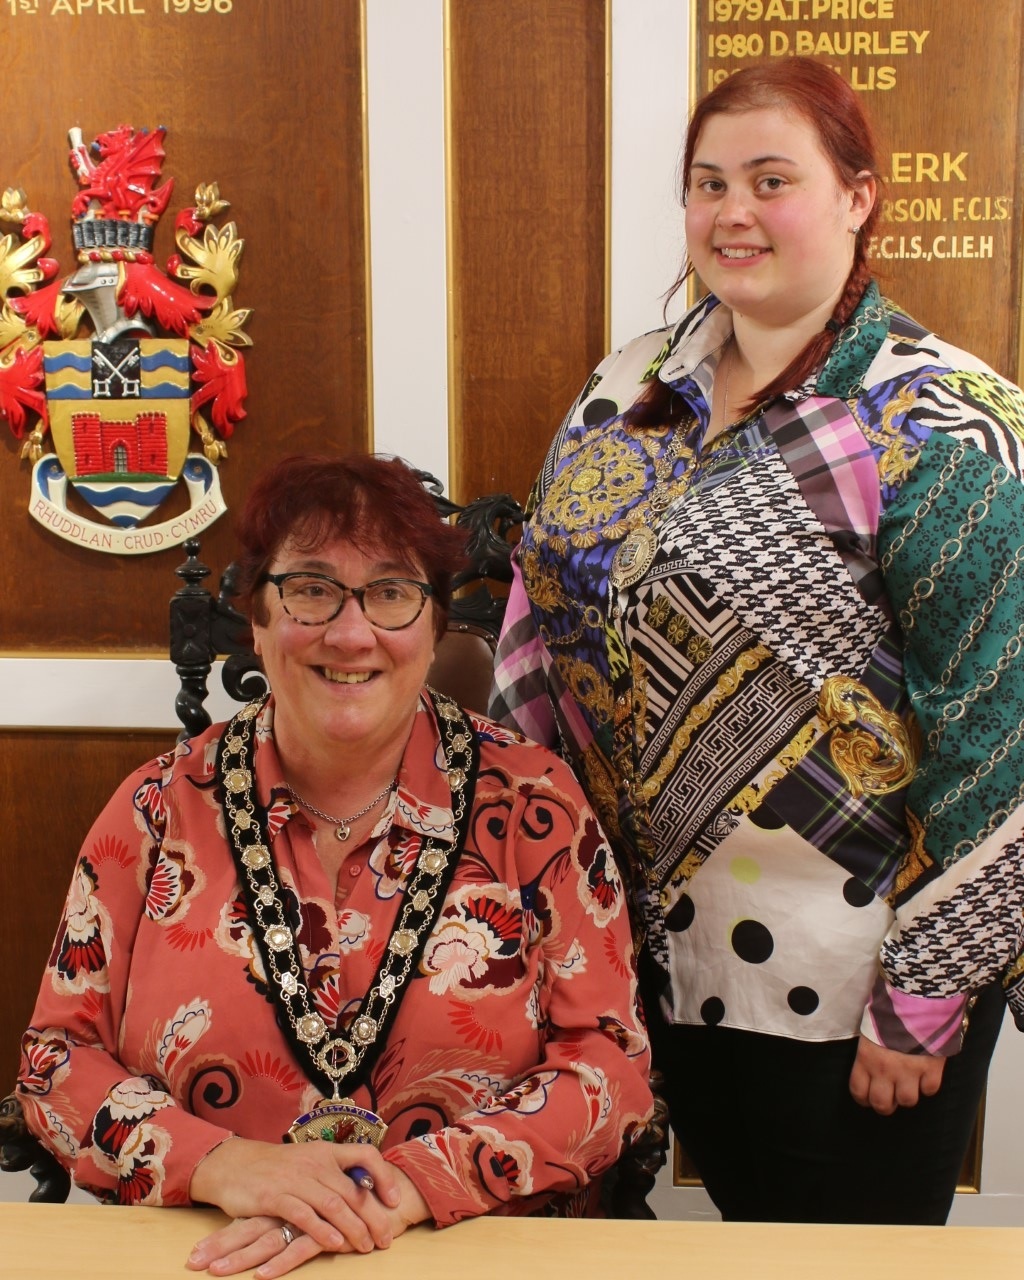 Cllr Sharon Frobisher and Harriet Frobisher, mayor and consort of Prestatyn and Meliden